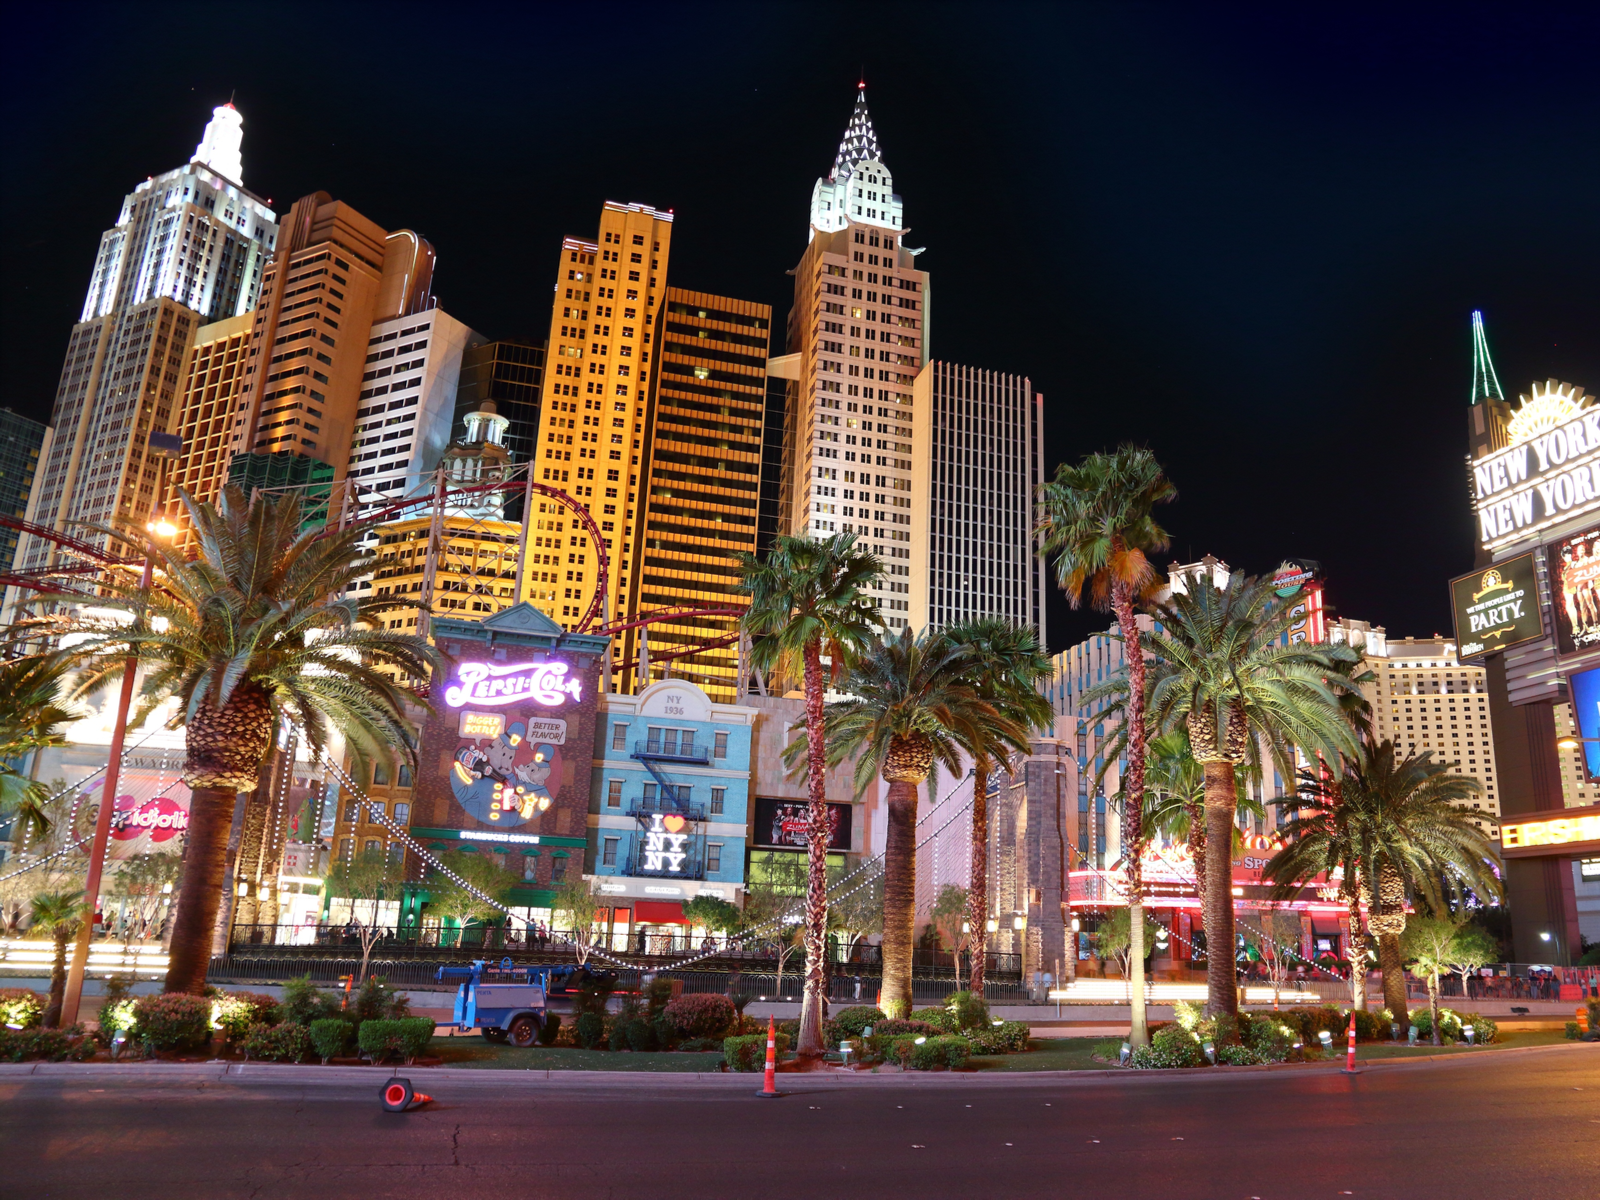 Image of the New York hotel in Las Vegas pictured during the best time to visit at night